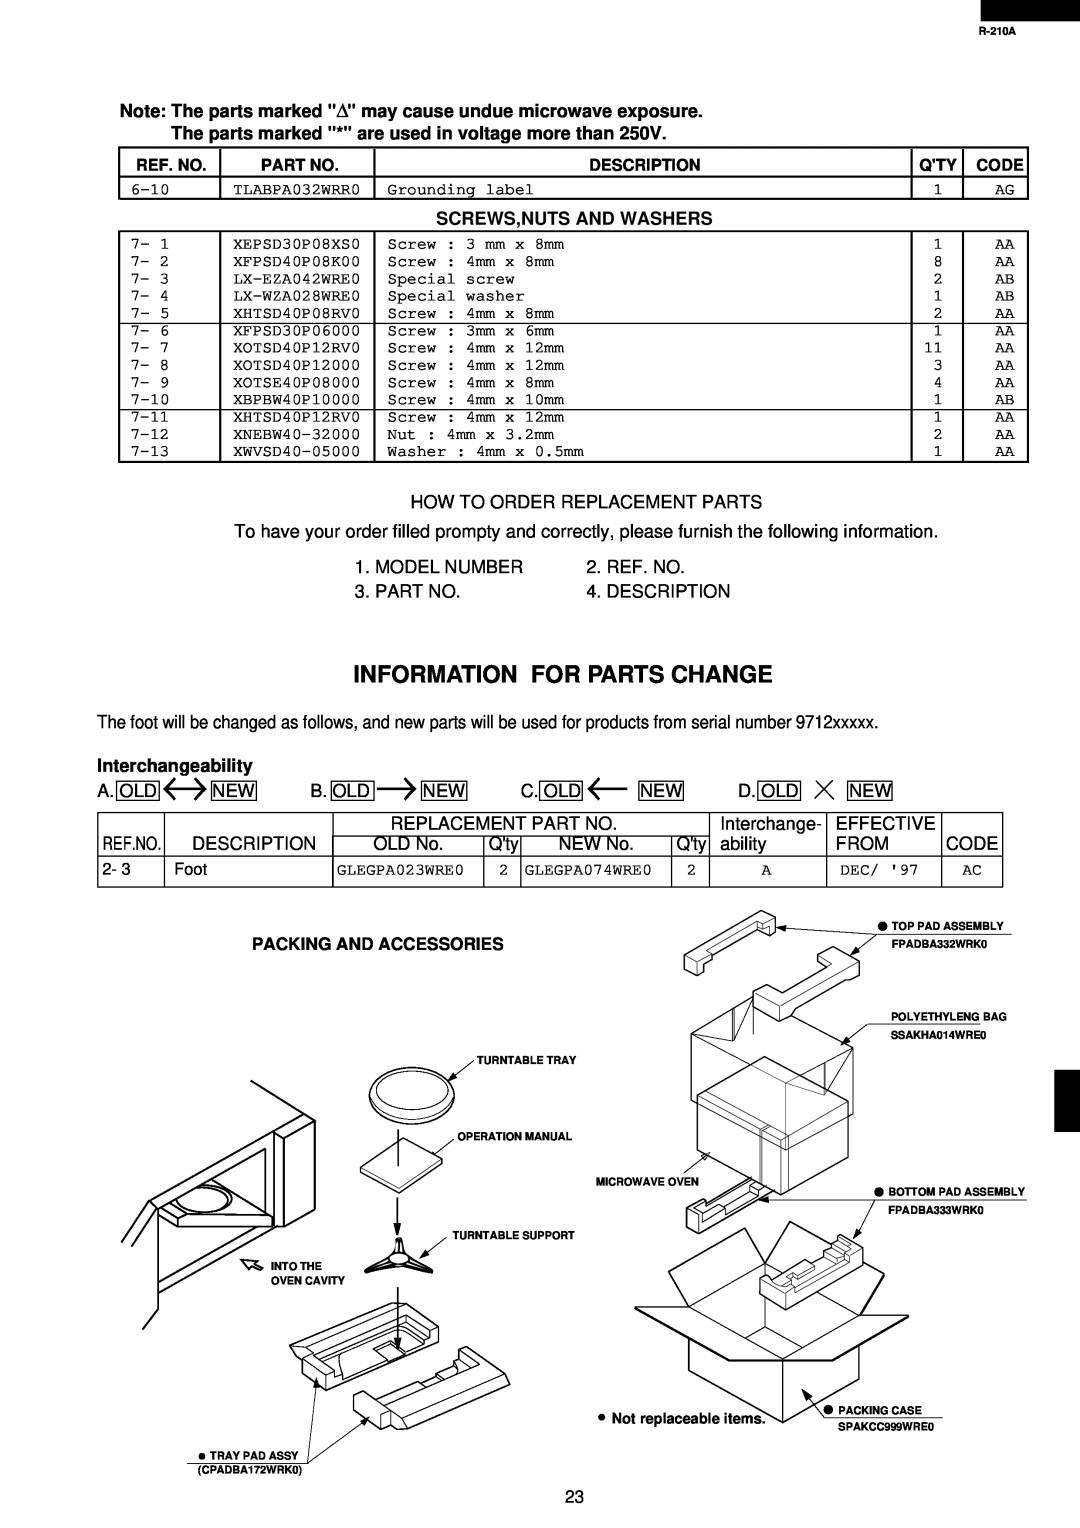 Sharp R-210A Information For Parts Change, The parts marked * are used in voltage more than, Screws,Nuts And Washers 